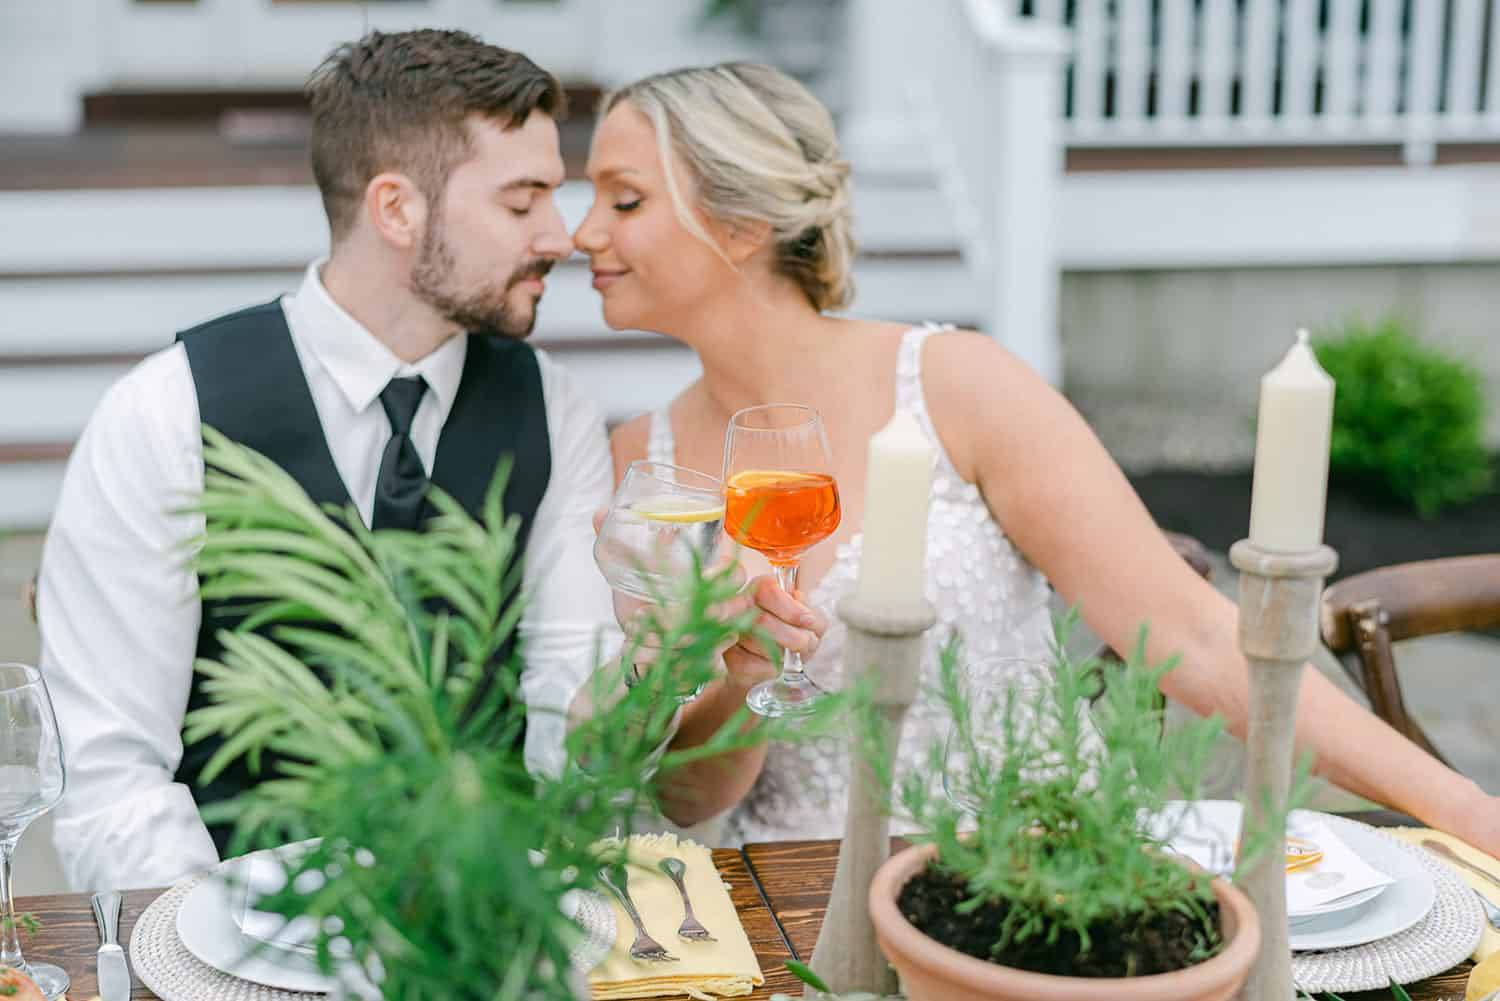 A couple toasting with drinks at an elegantly set outdoor dining table, leaning in for a kiss.